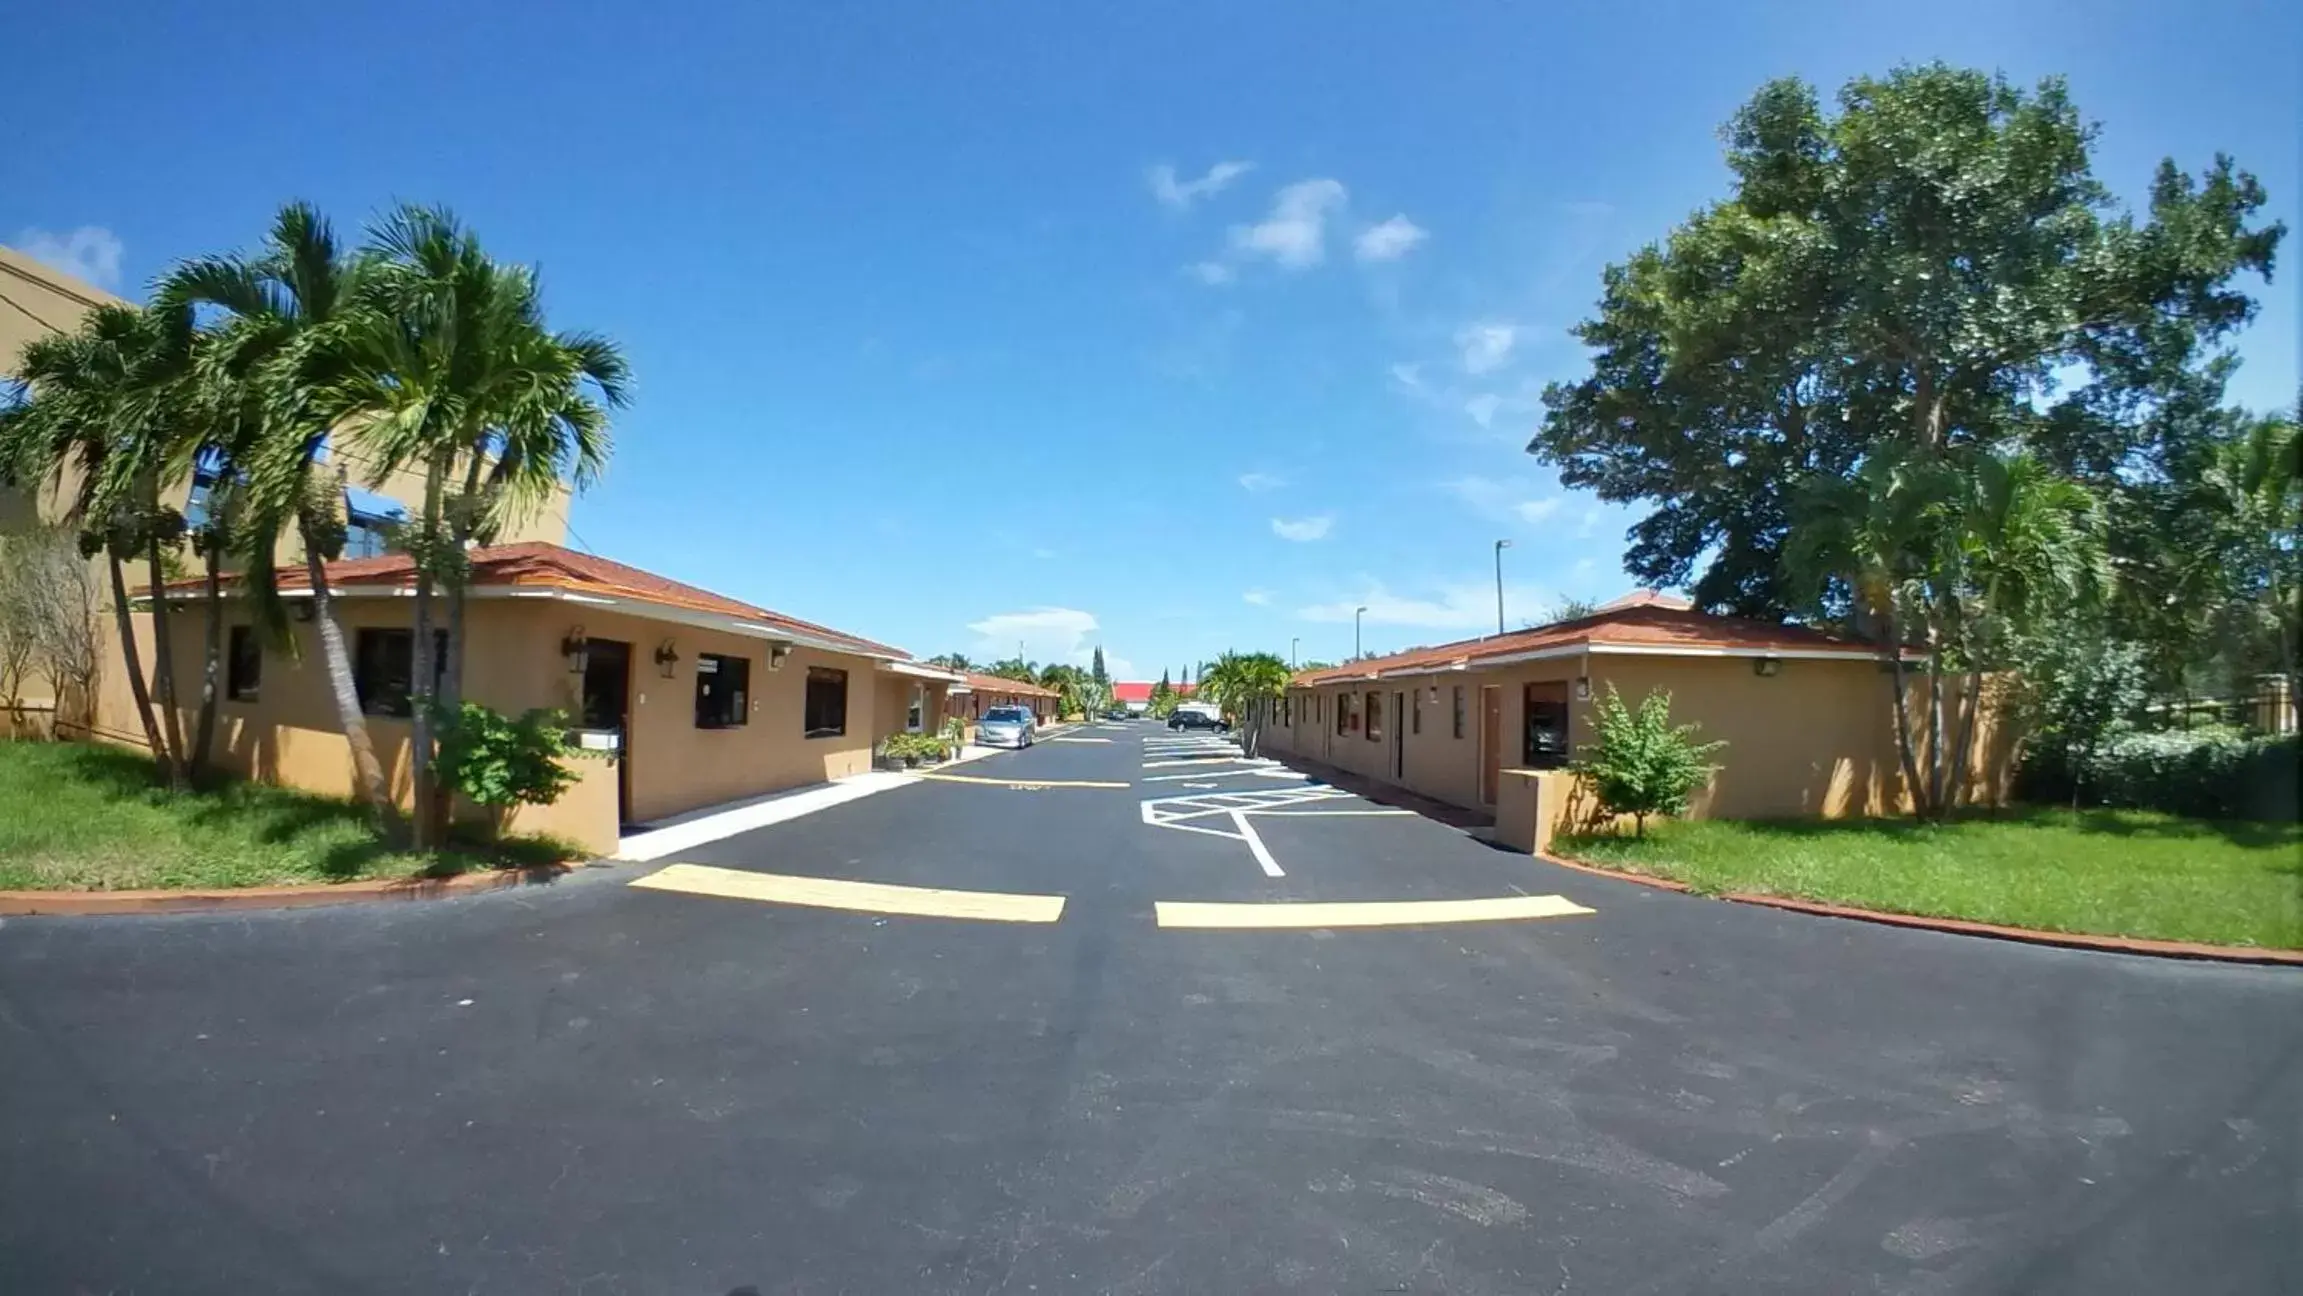 Property Building in Travel Inn of Riviera Beach